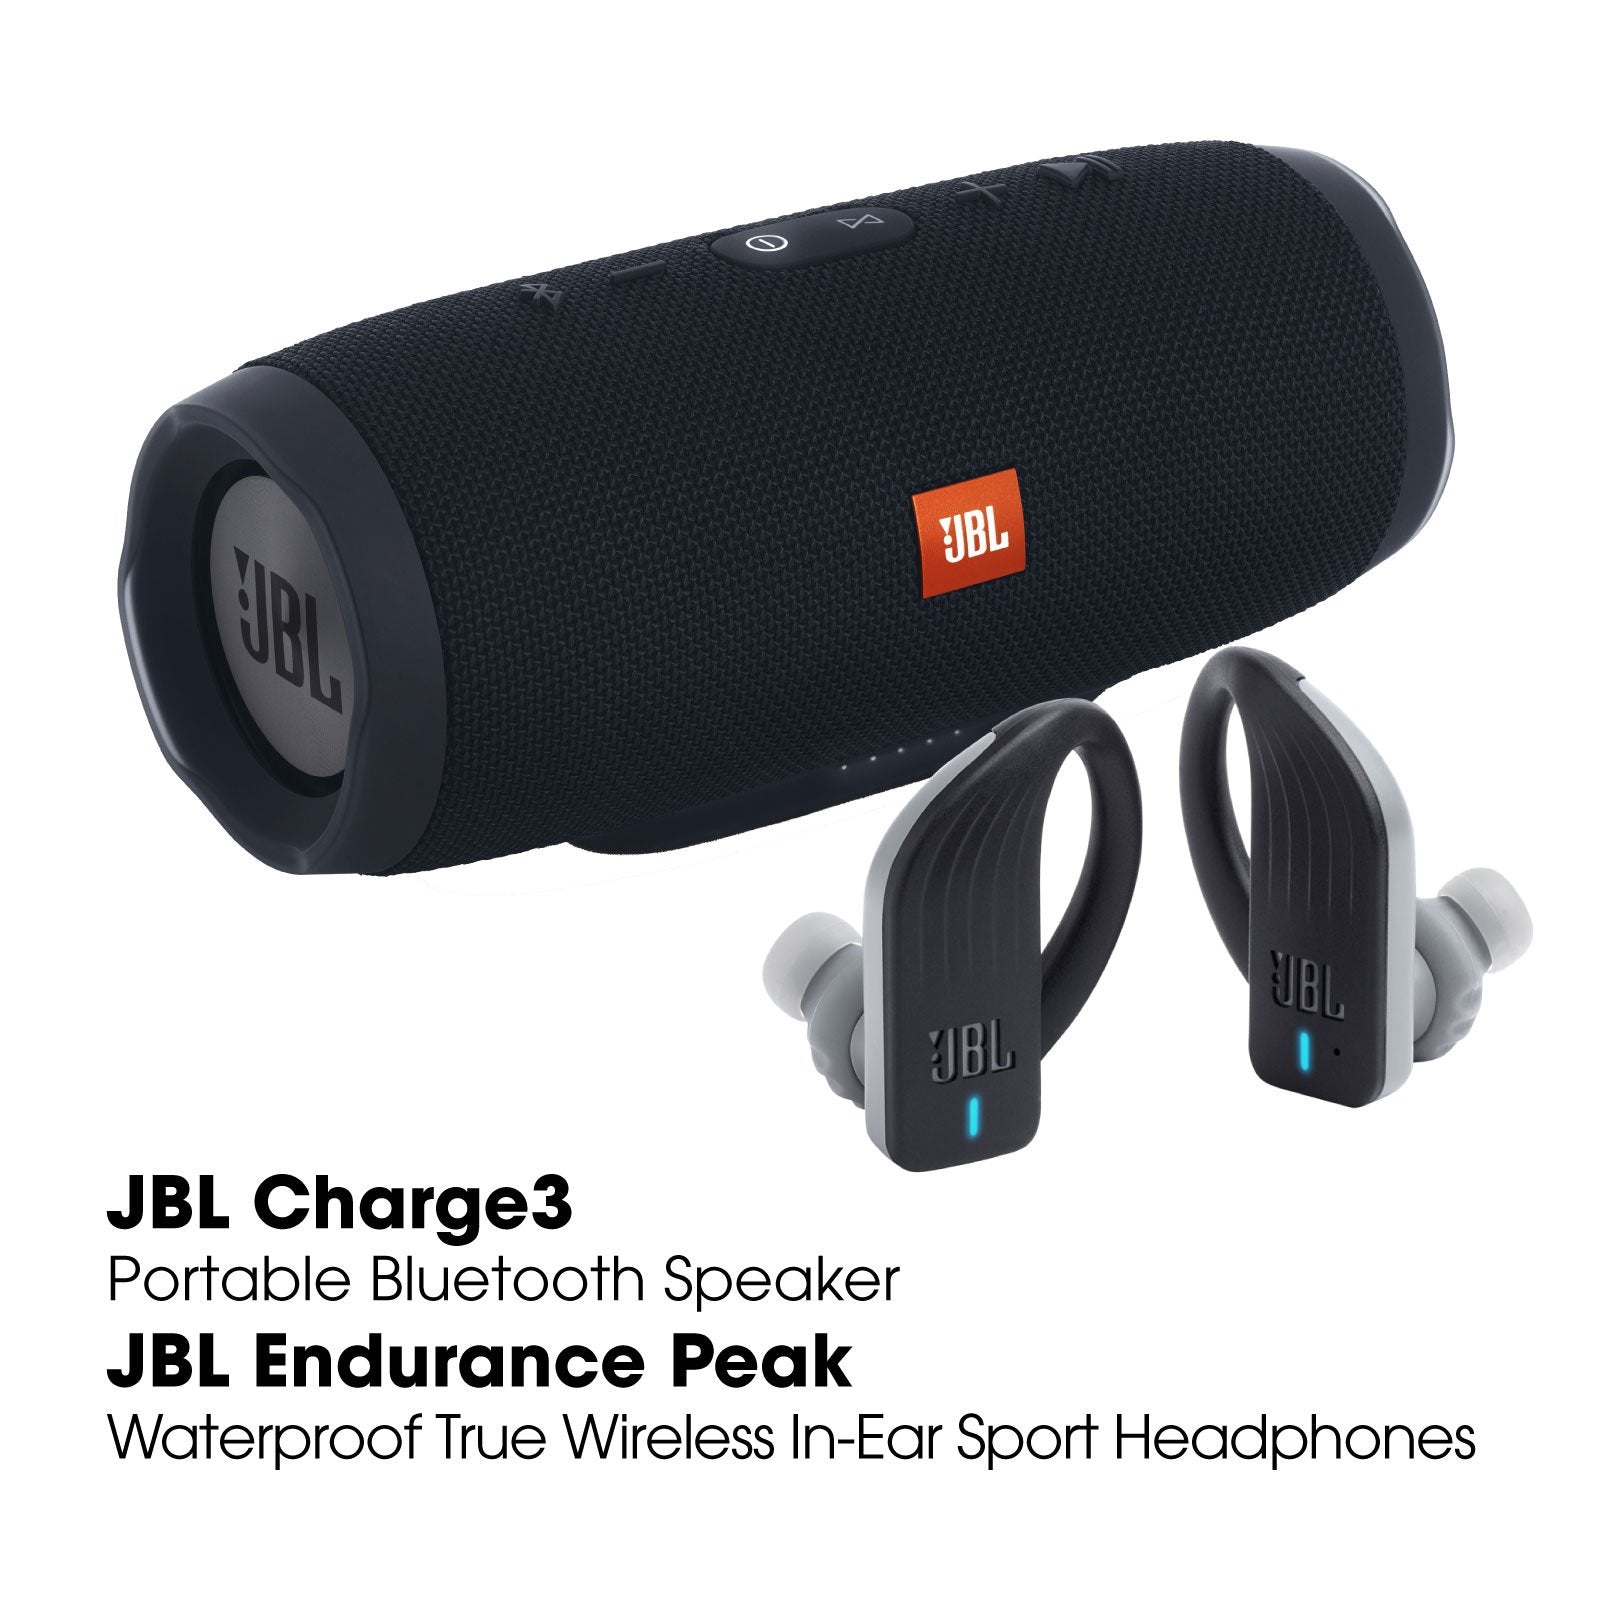 connect to jbl charge 3